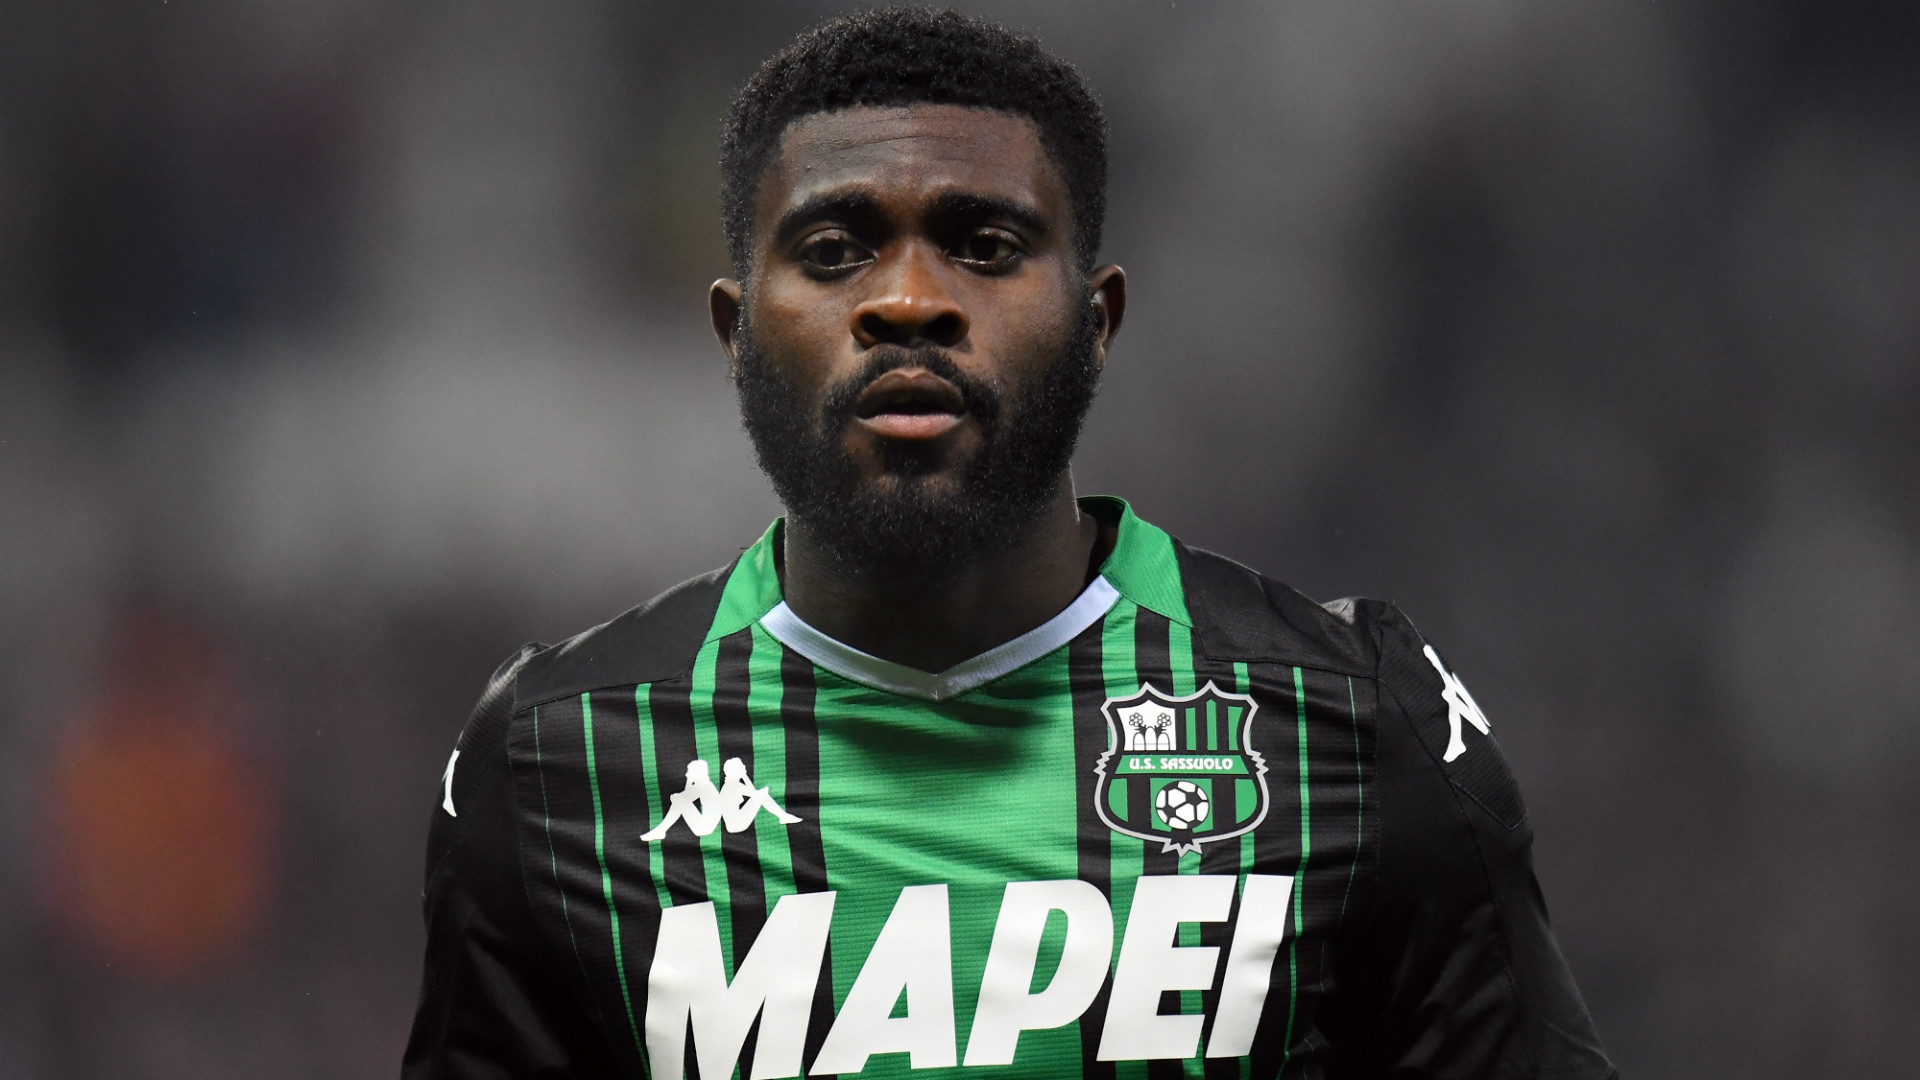 Napoli tried hard to sign Boga but Sassuolo didn’t want to sell – Agent